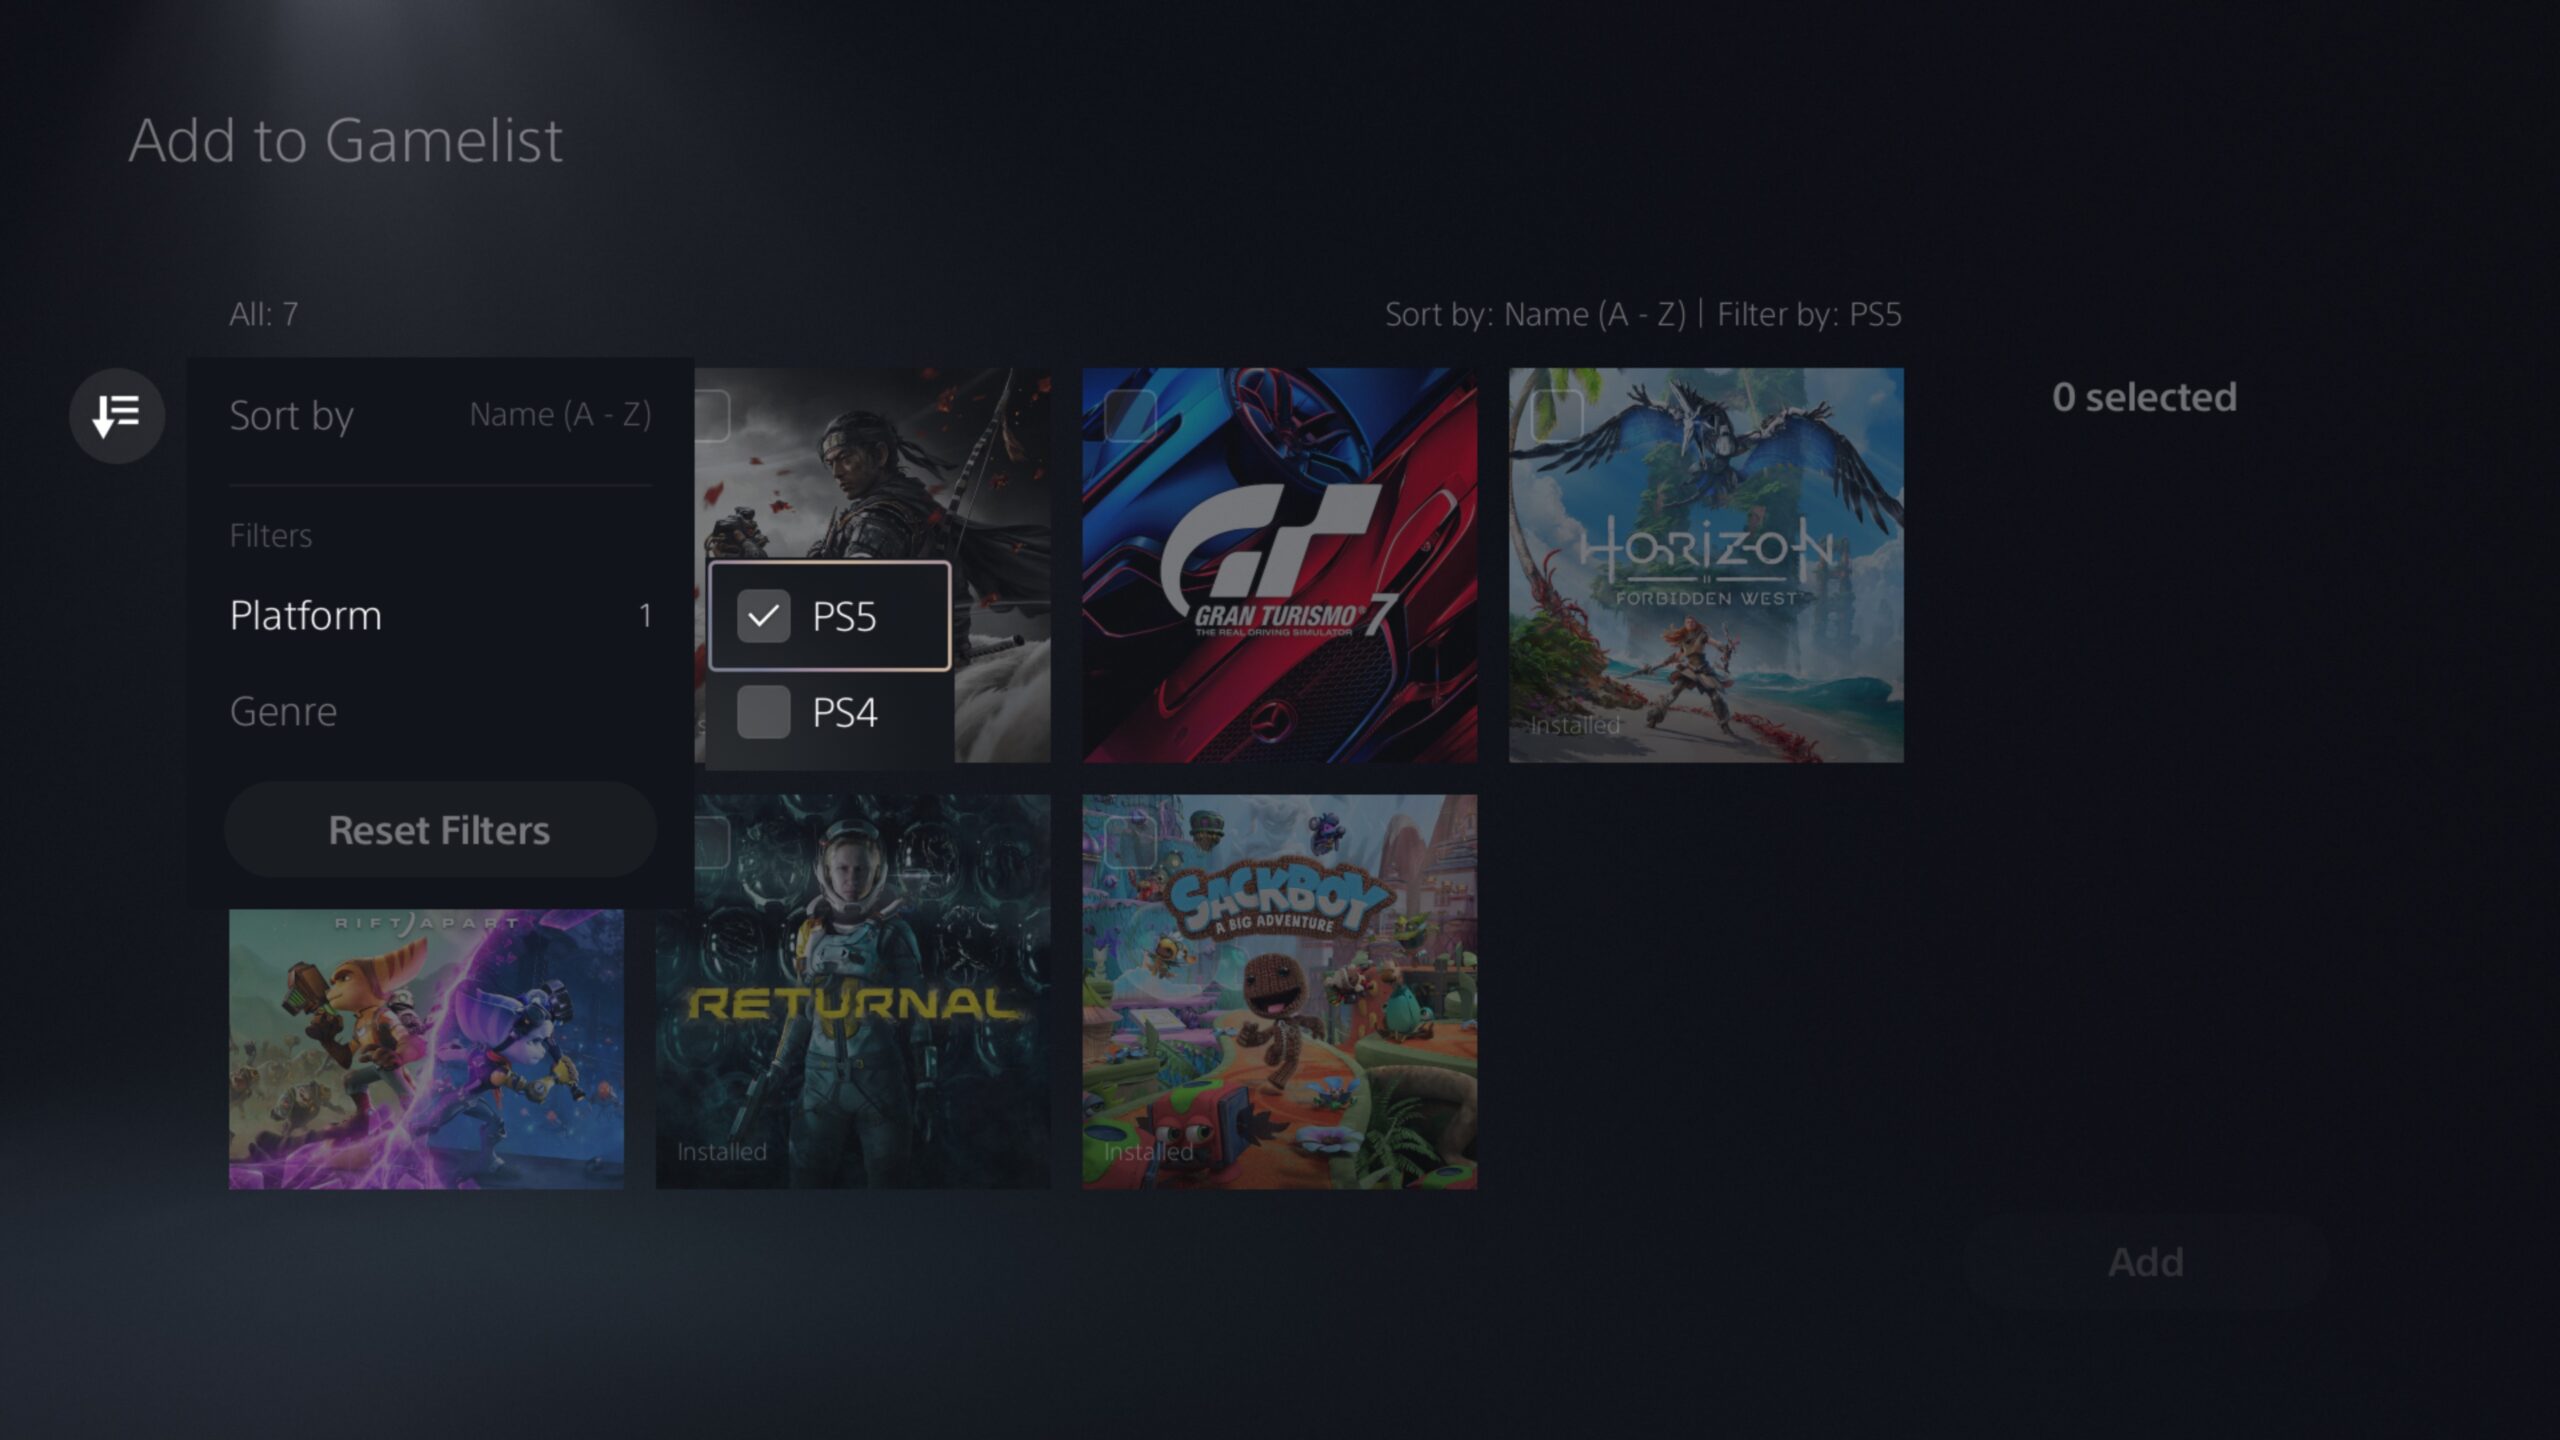  "PlayStation 5 UI screenshot showing the option to filter games by PS5 or PS4 in a gamelist"